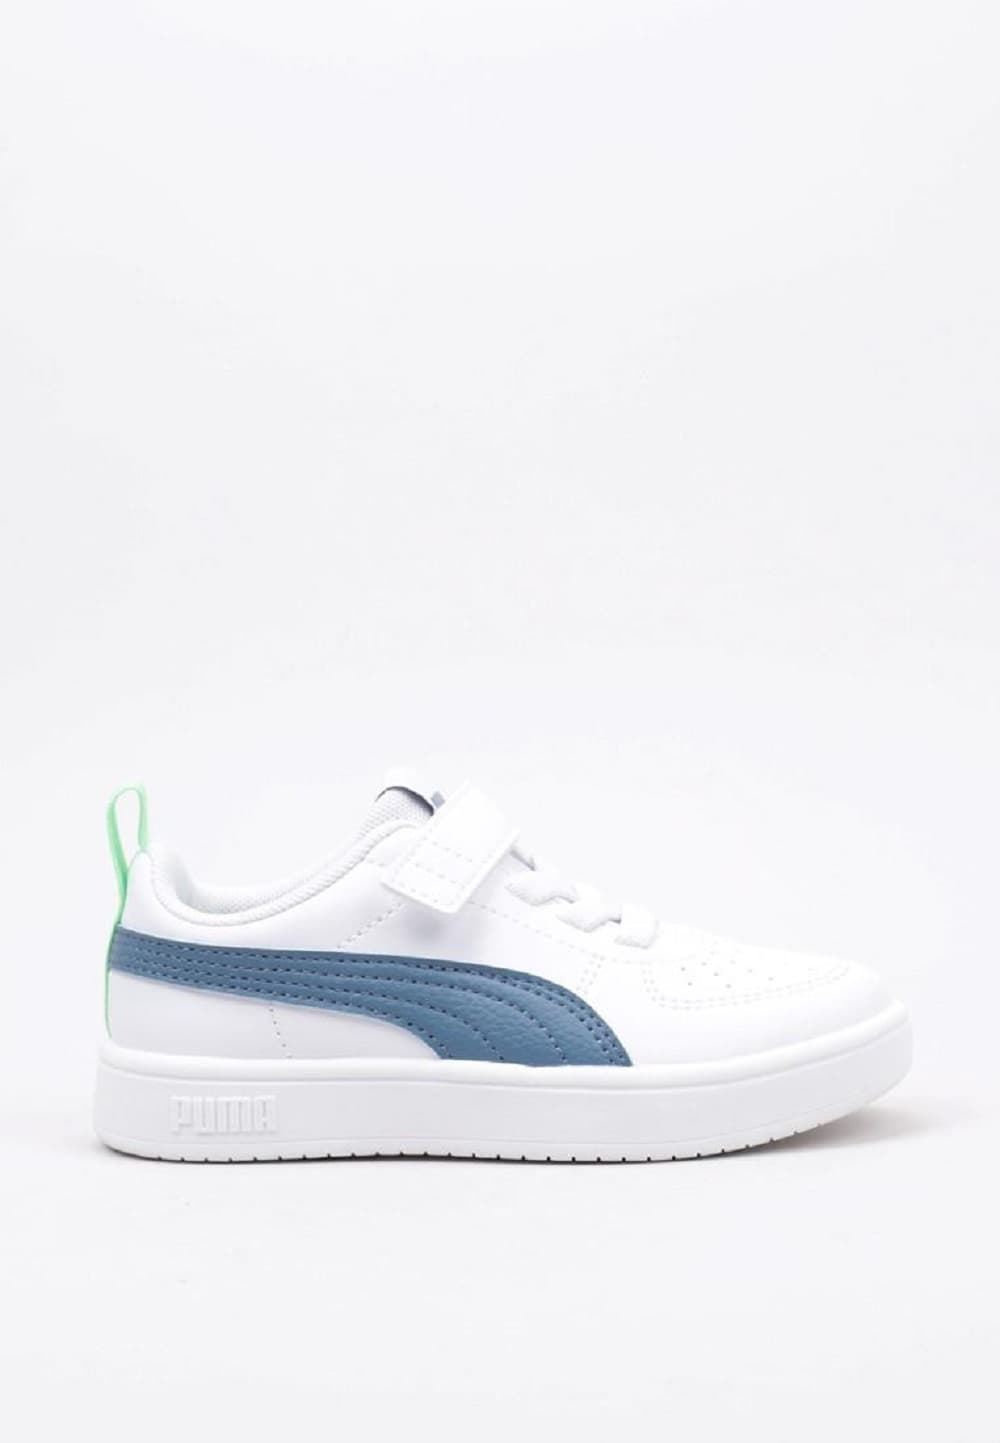 Puma Rickie Sneakers White-Jeans with Velcro - Image 1